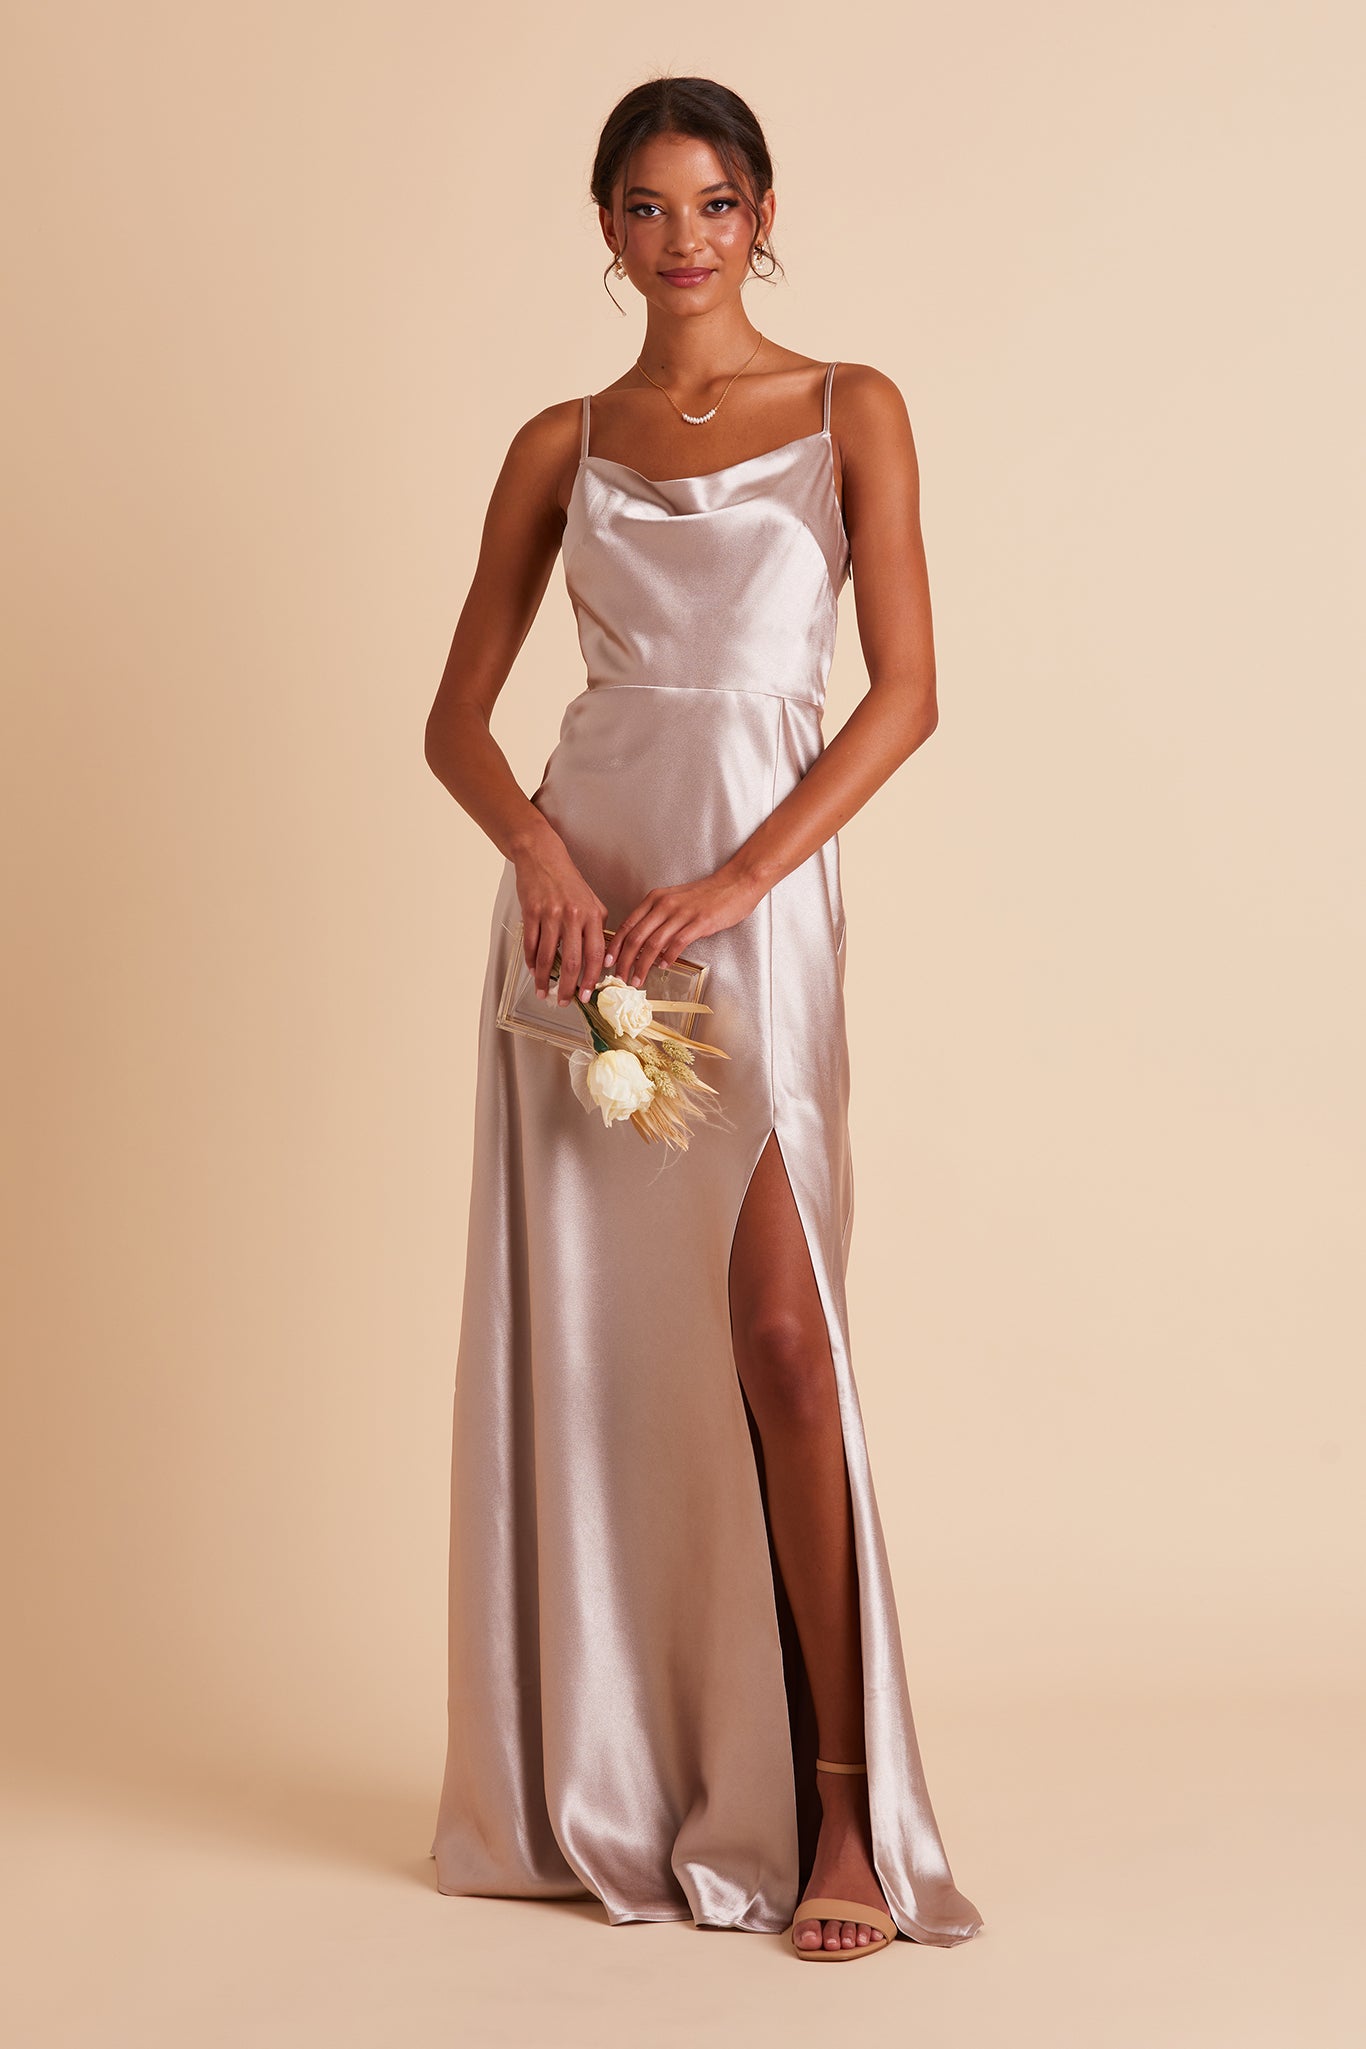 Front view of the Lisa Long Dress in taupe satin shows a model revealing their leg and foot in the mid-thigh high slit. They wear the Natalie Chunky Heel shoe in rose mauve.